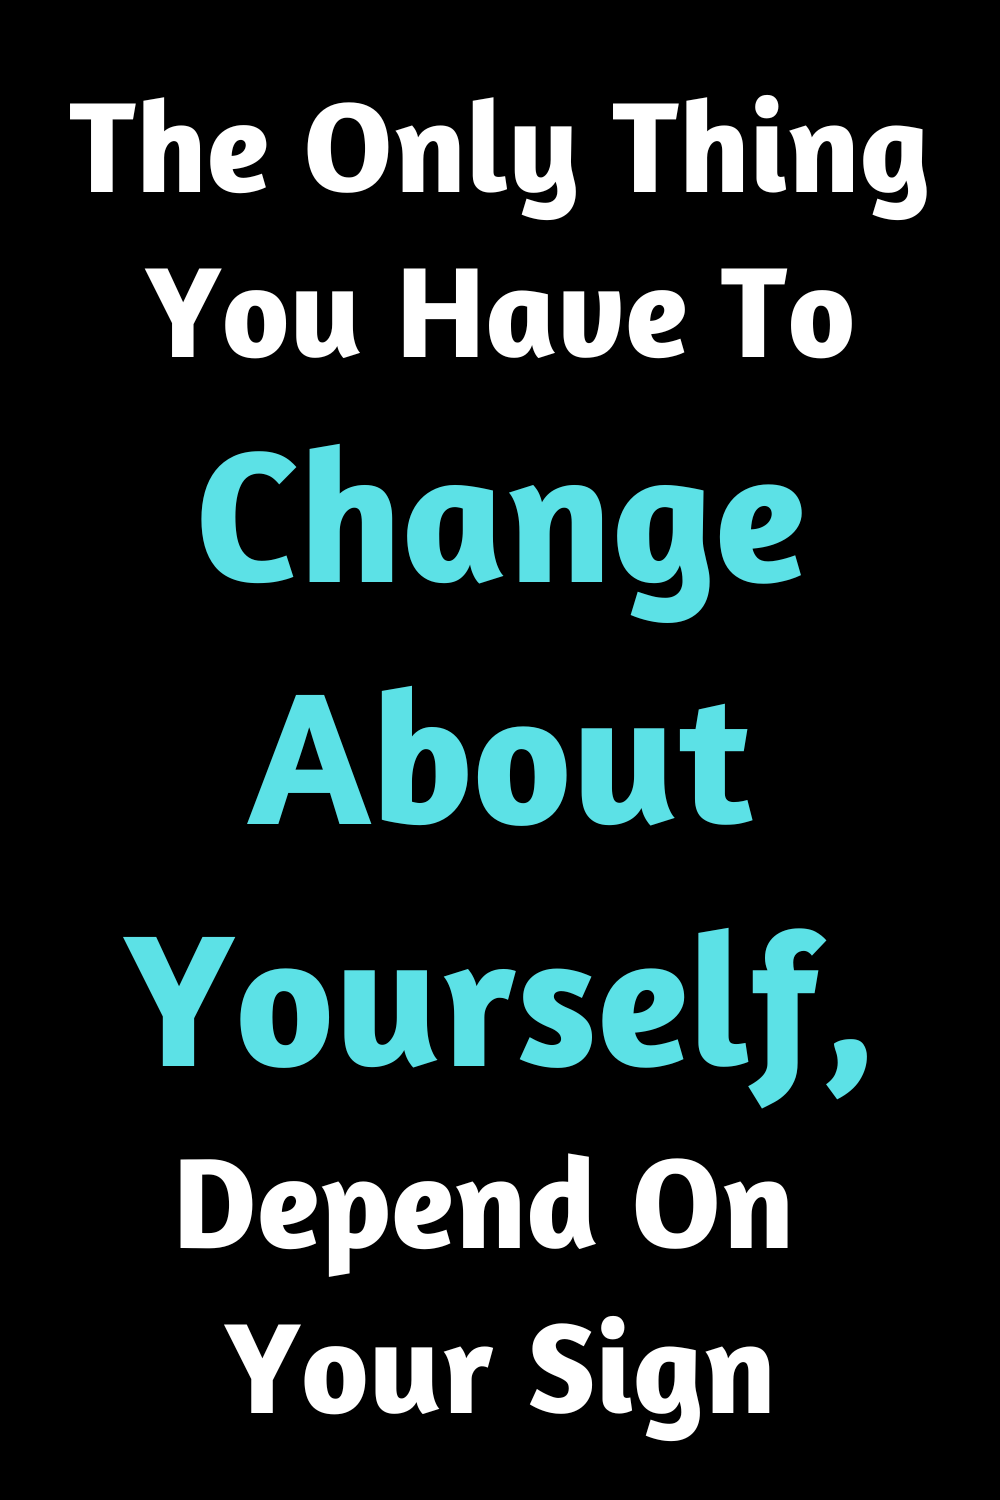 The Only Thing You Have To Change About Yourself, Depend On Your Sign